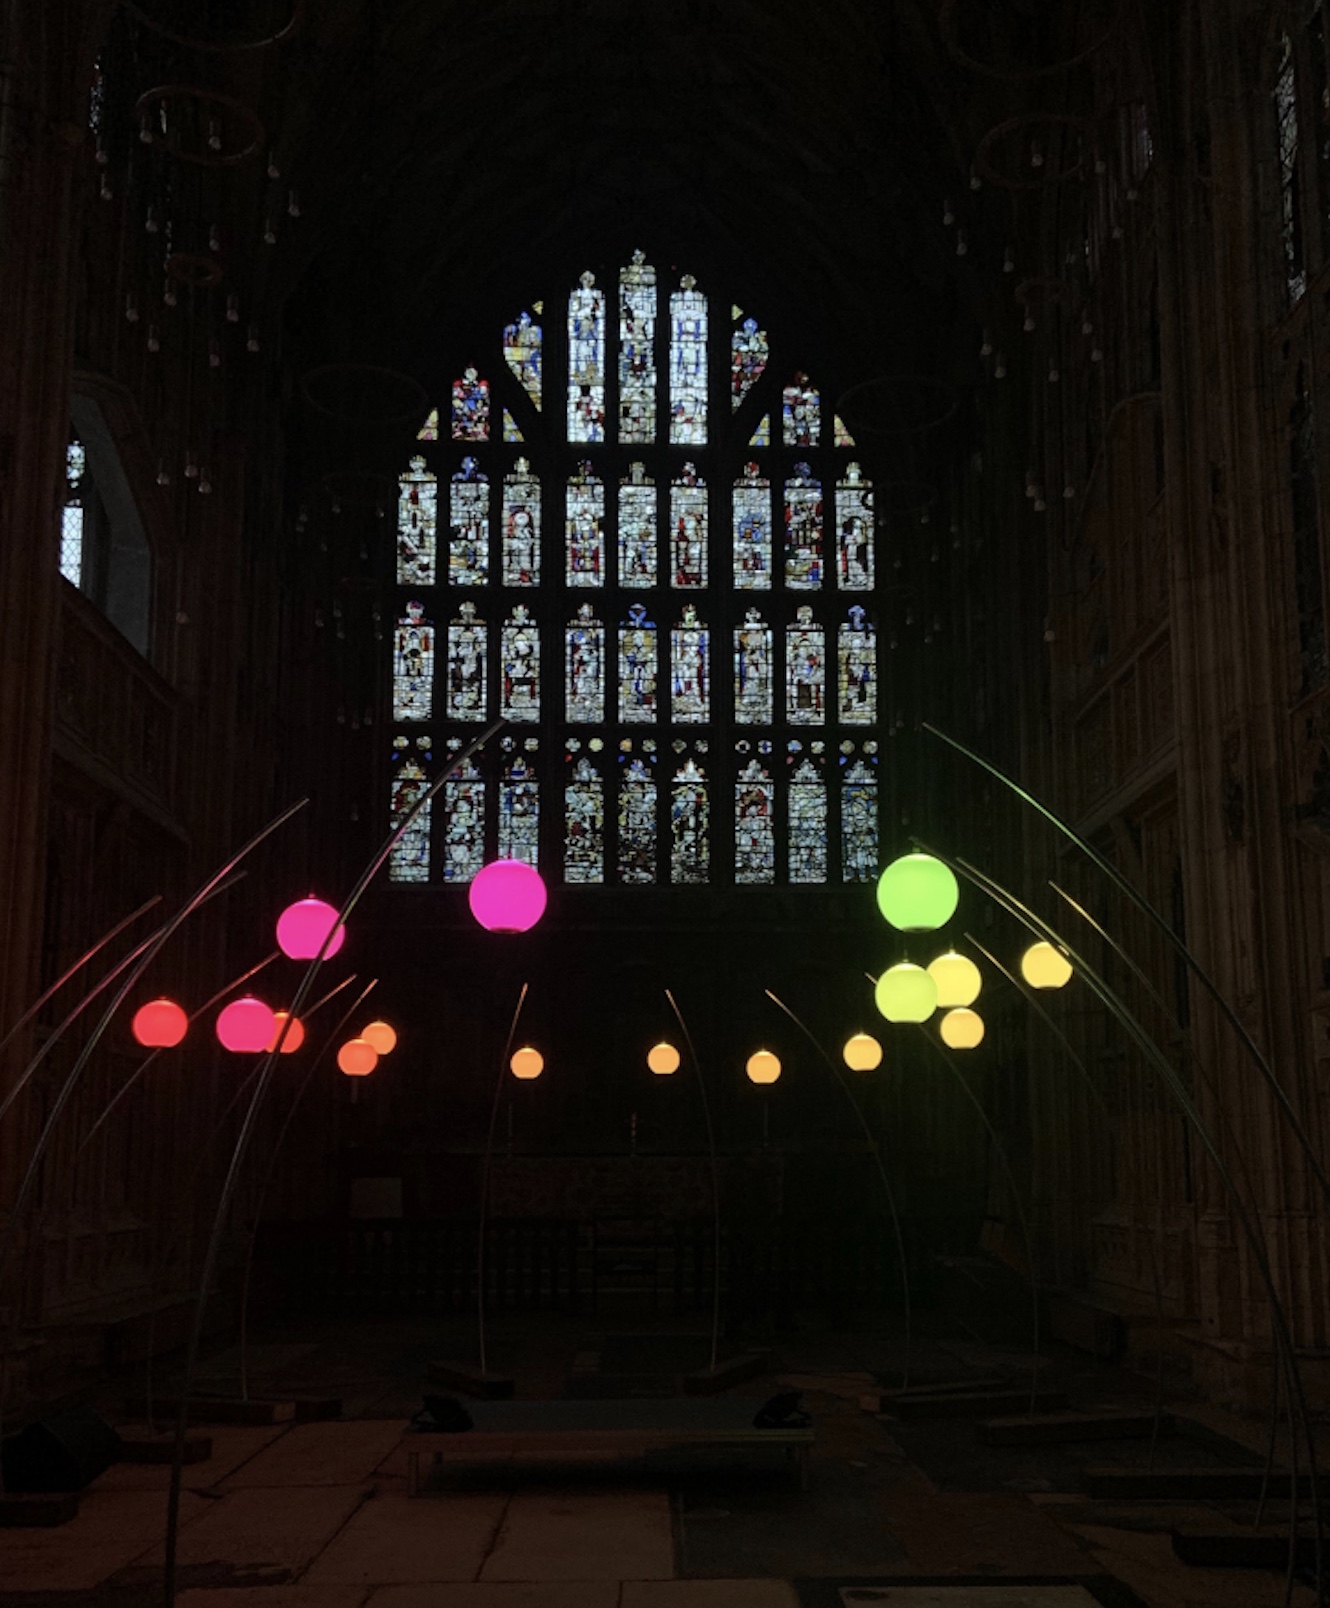 ‘Lights Out’ opens in Gloucester Cathedral – a response by young people to the arrival of the Knife Angel sculpture.